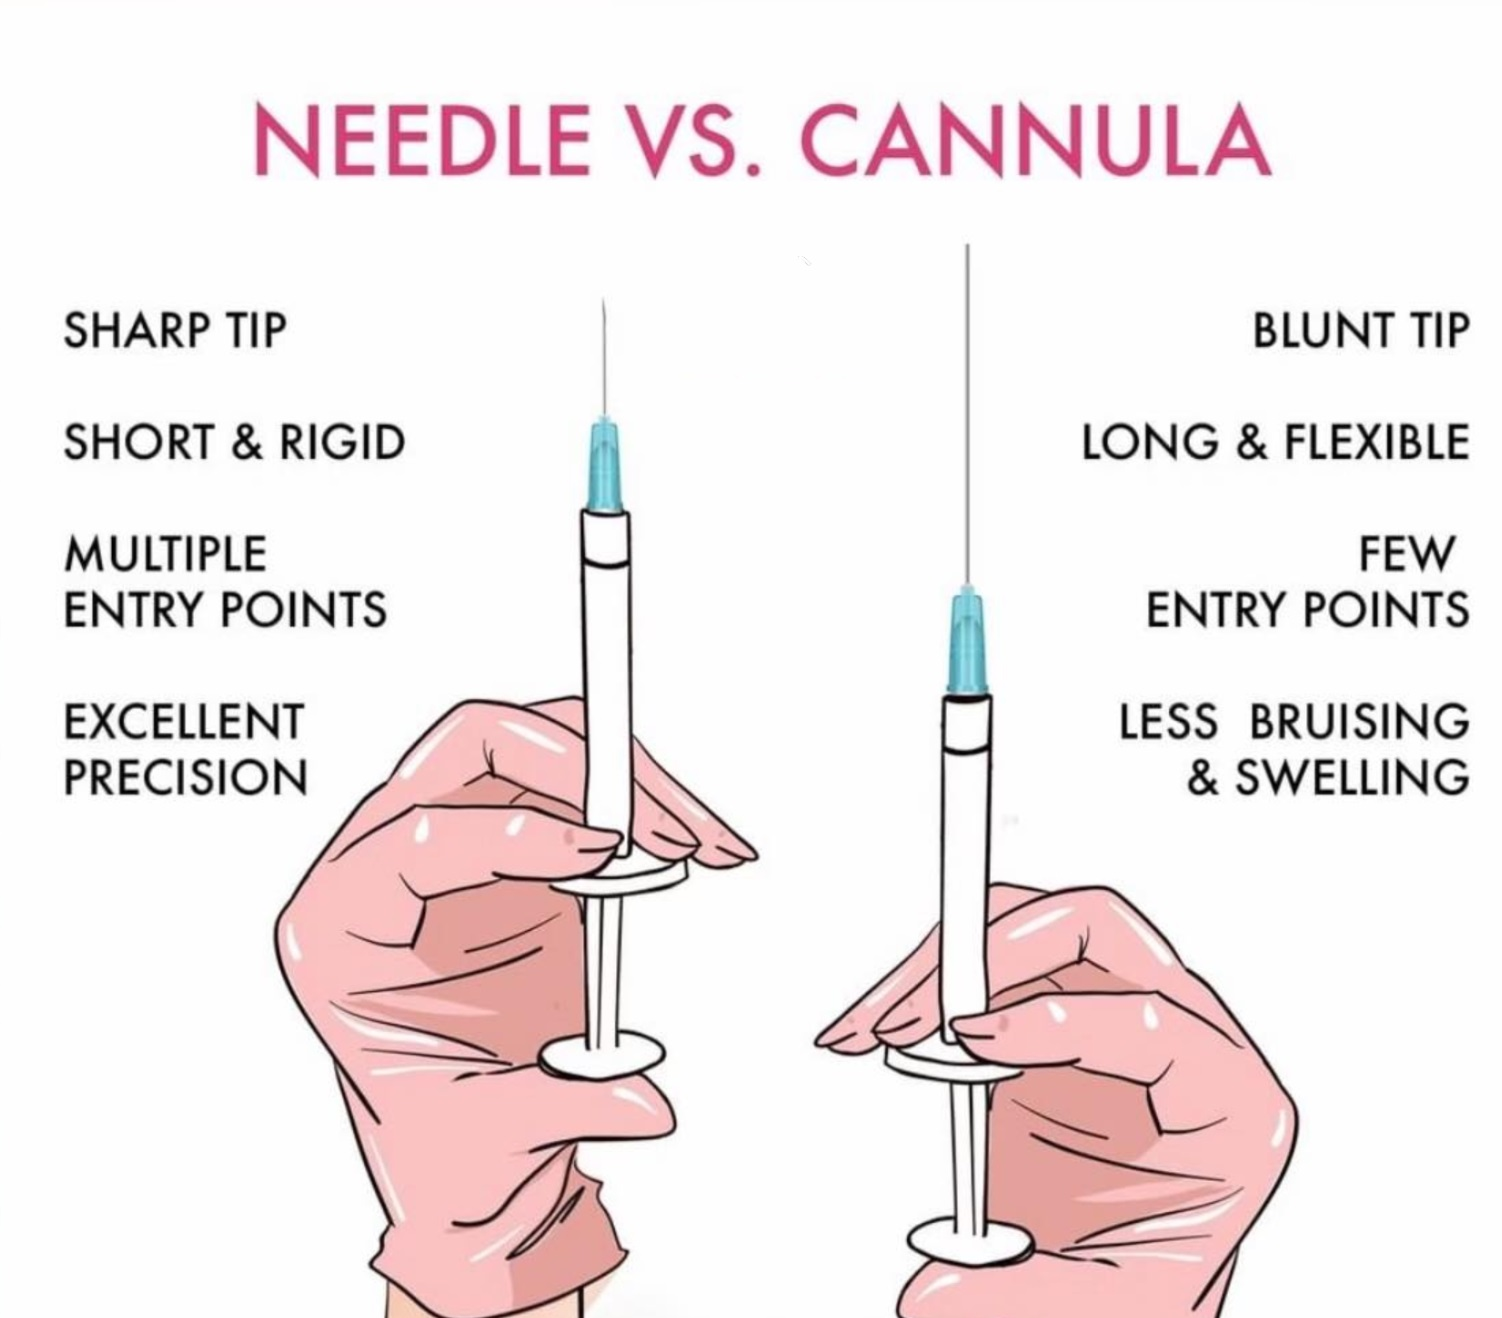 Comparison of sharp needle and cannula injection techniques